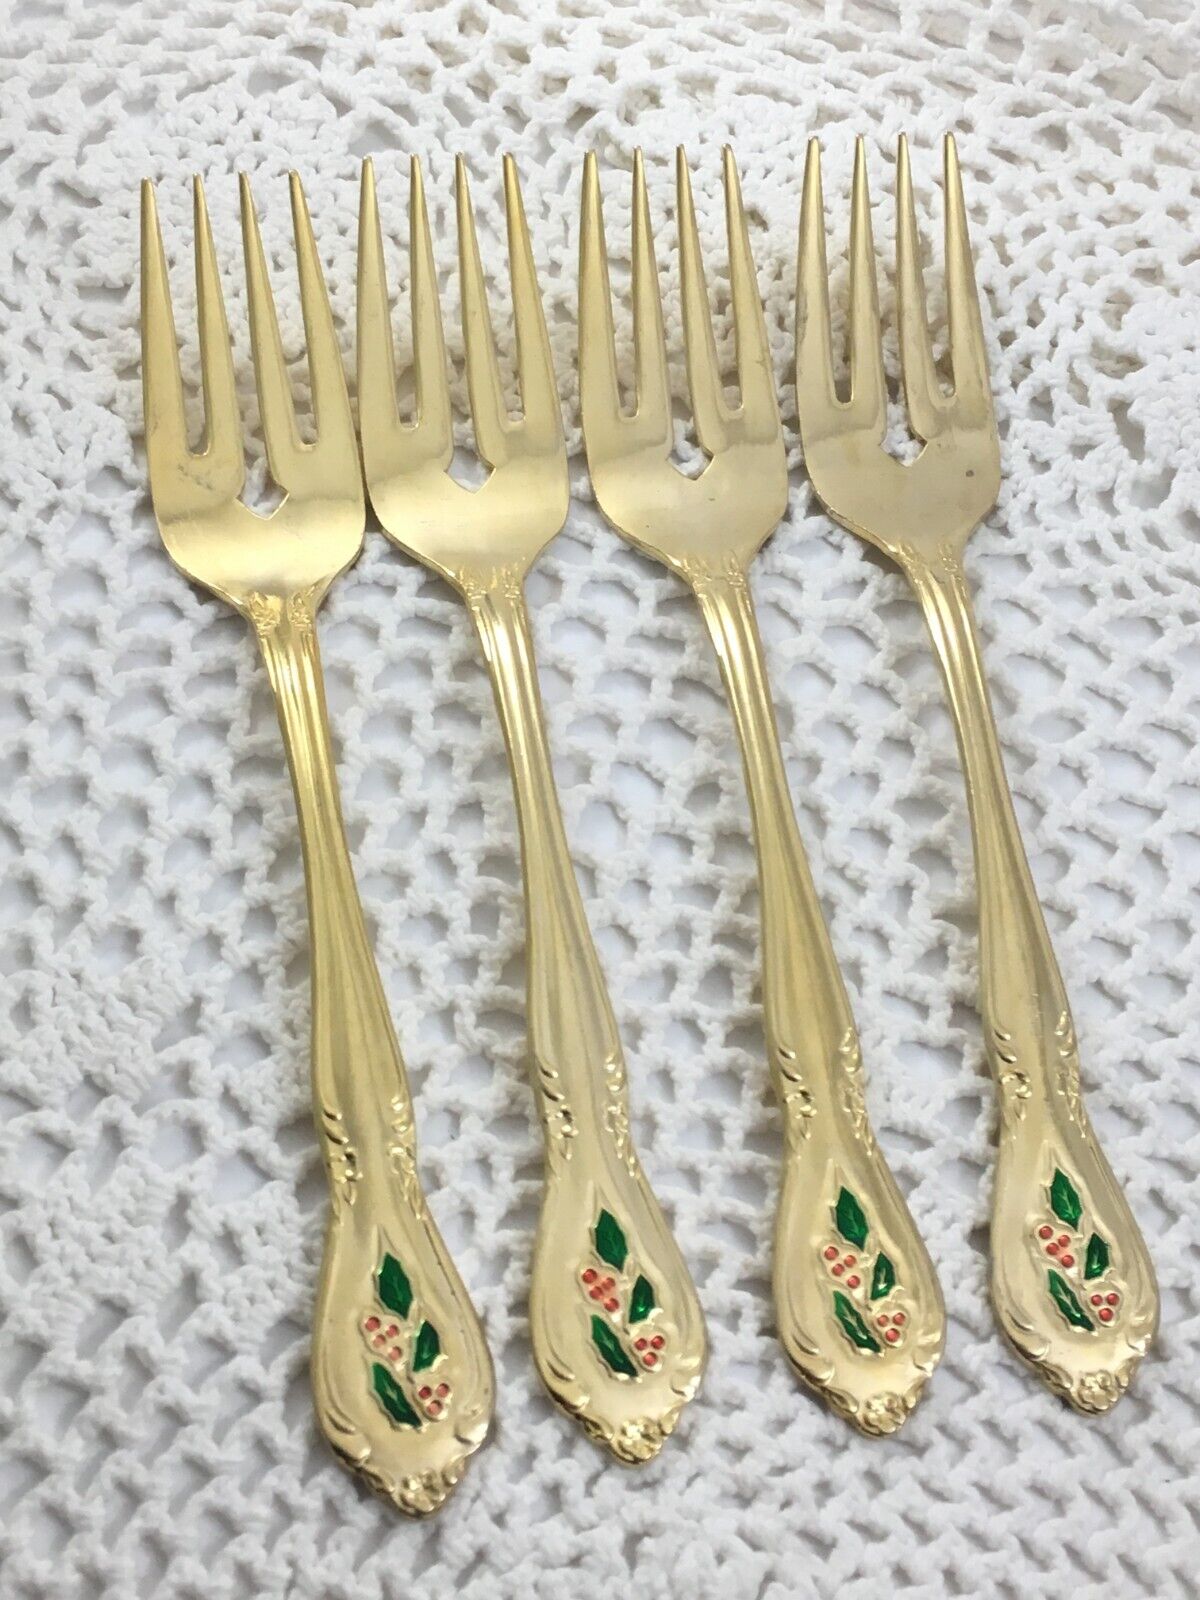 HOLLY Yuletide Unknown Manufacturer Holly Berry Christmas Gold 4 Salad Forks